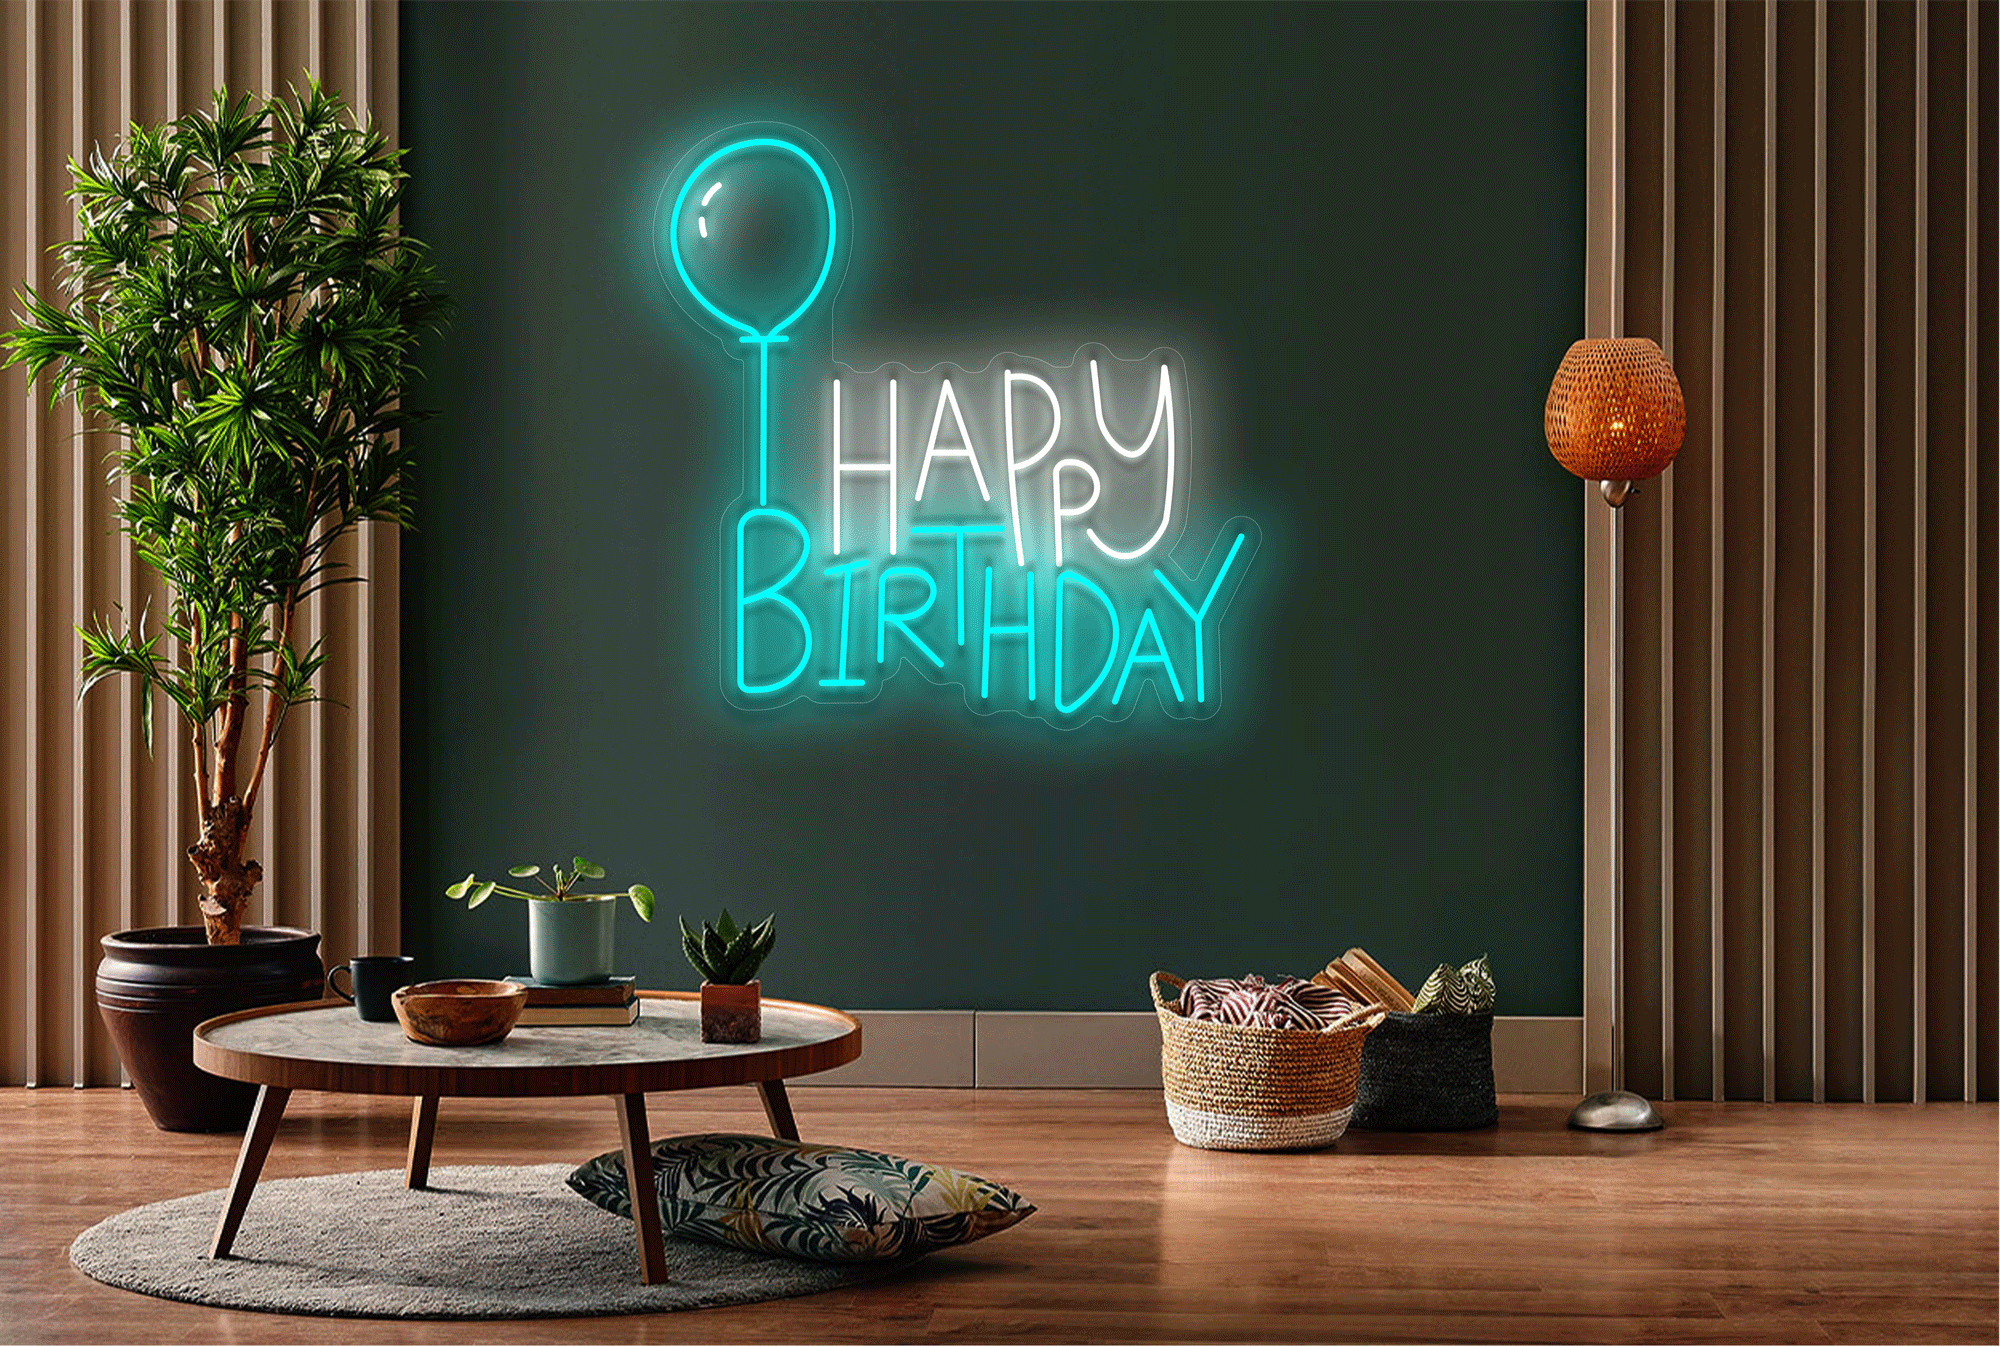 "Happy Birthday" with Balloon LED Neon Sign